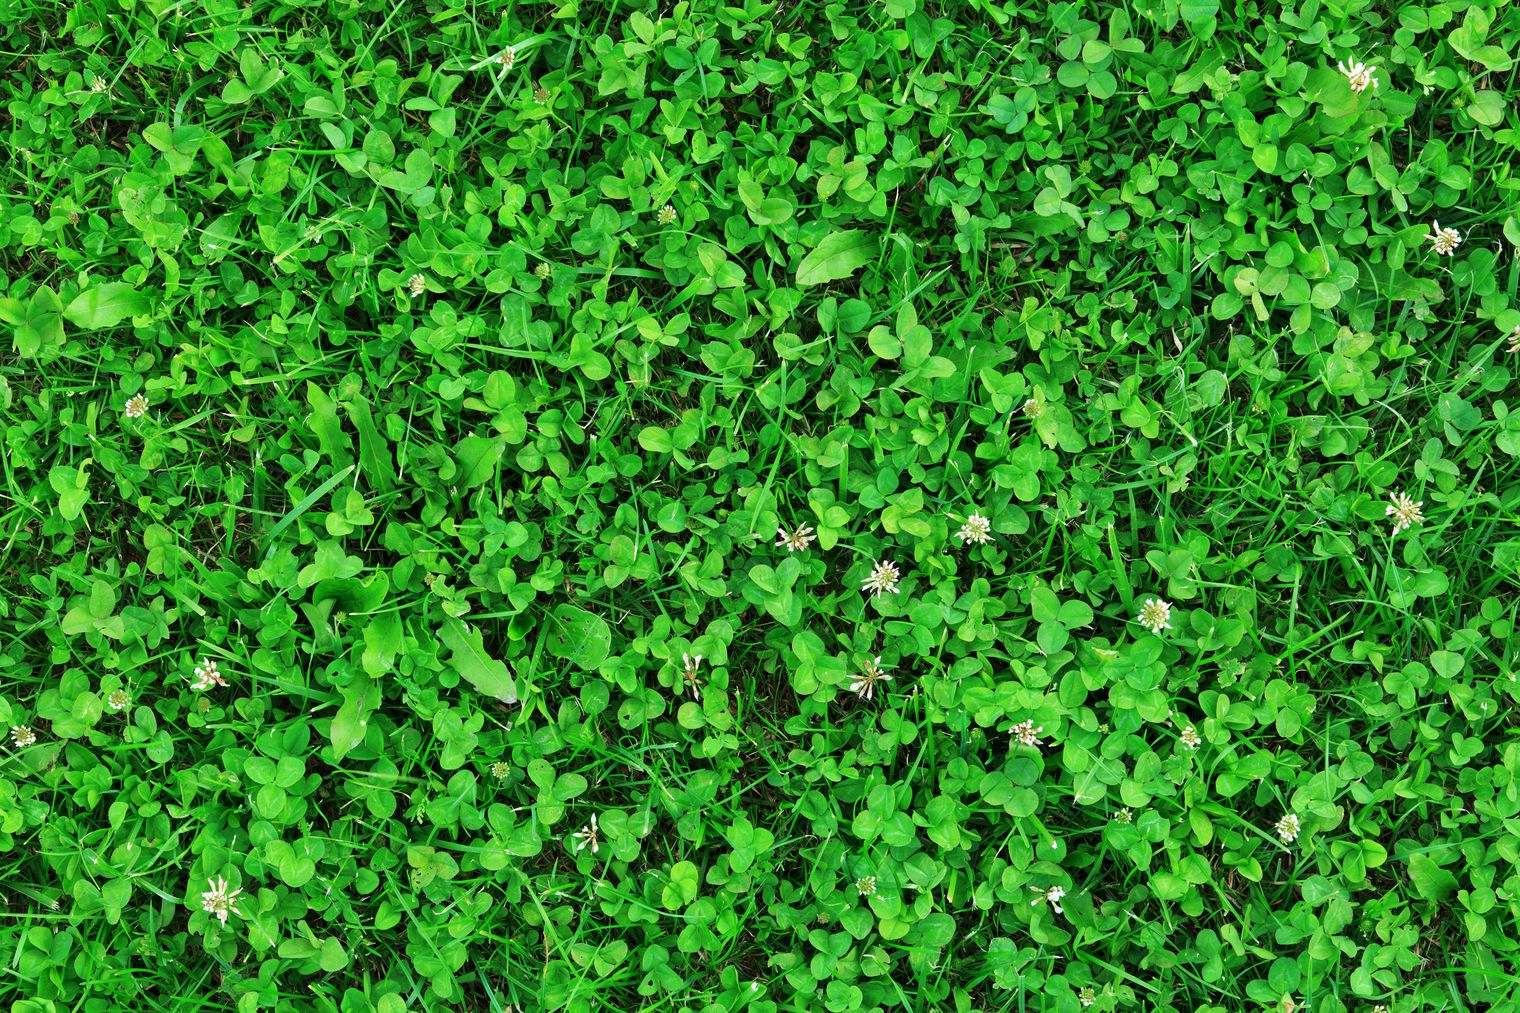 How to Get Rid of Clover in Your Lawn Naturally